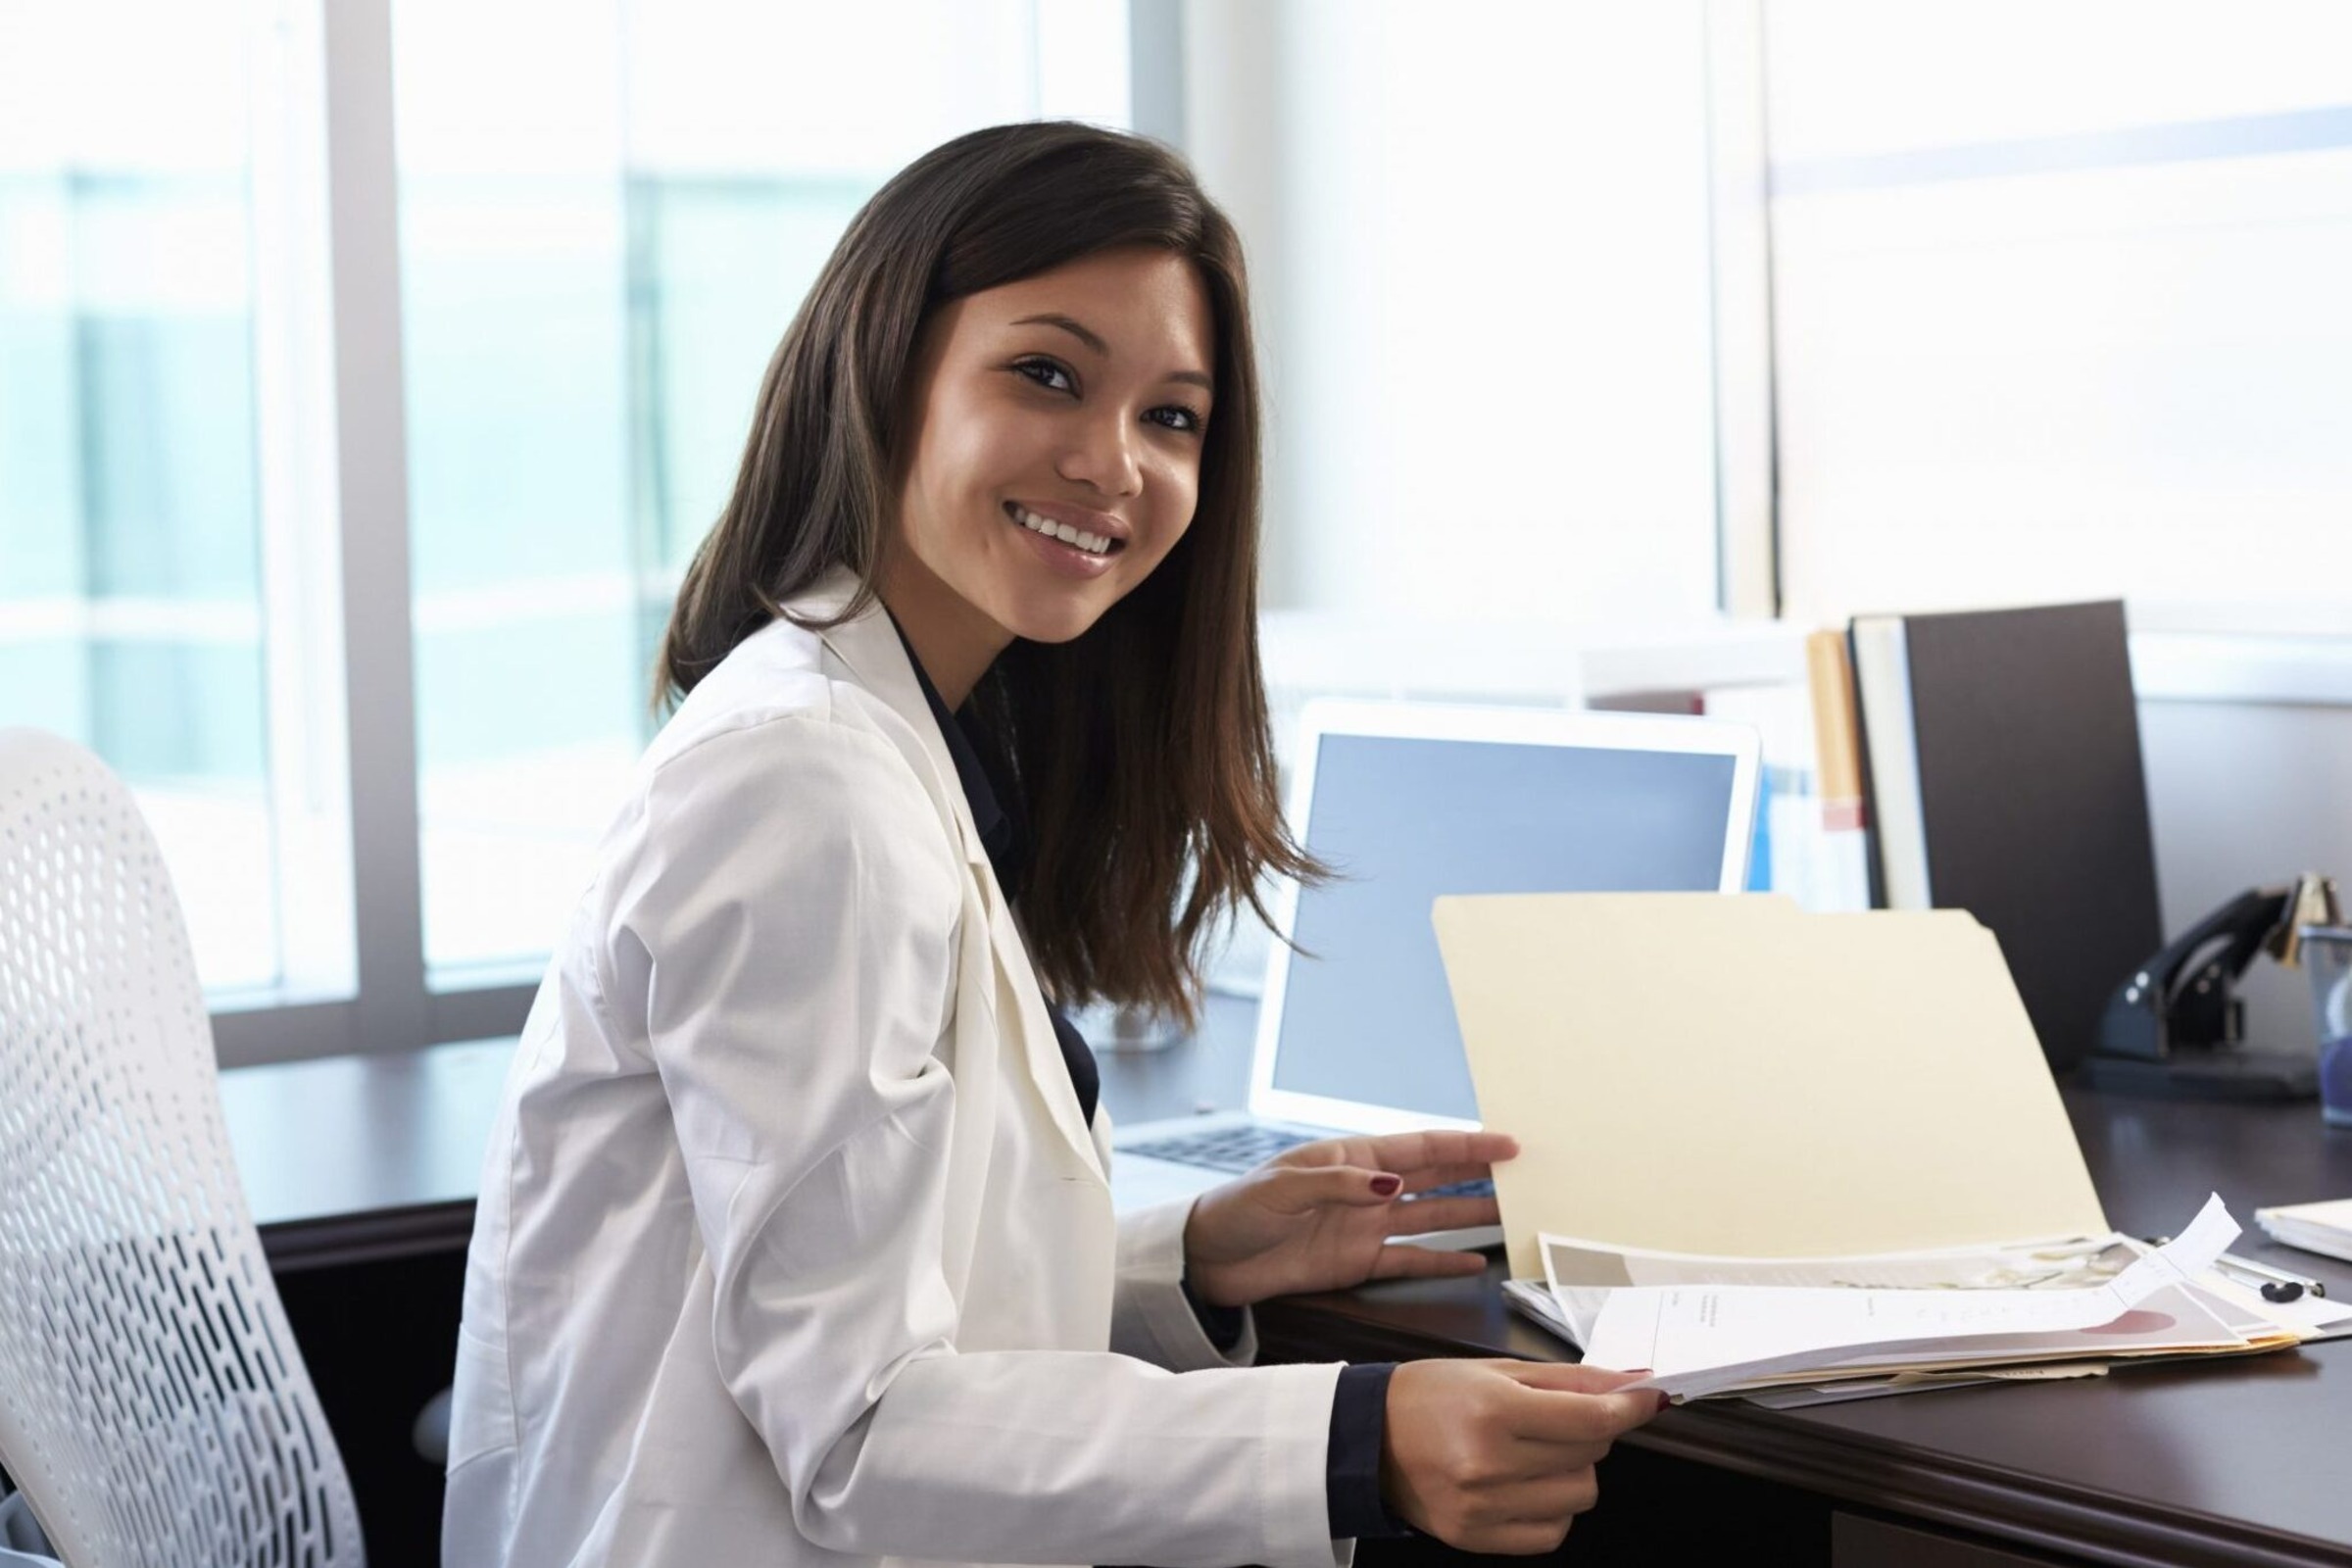 student in white lab coat sitting at a desk with file folder